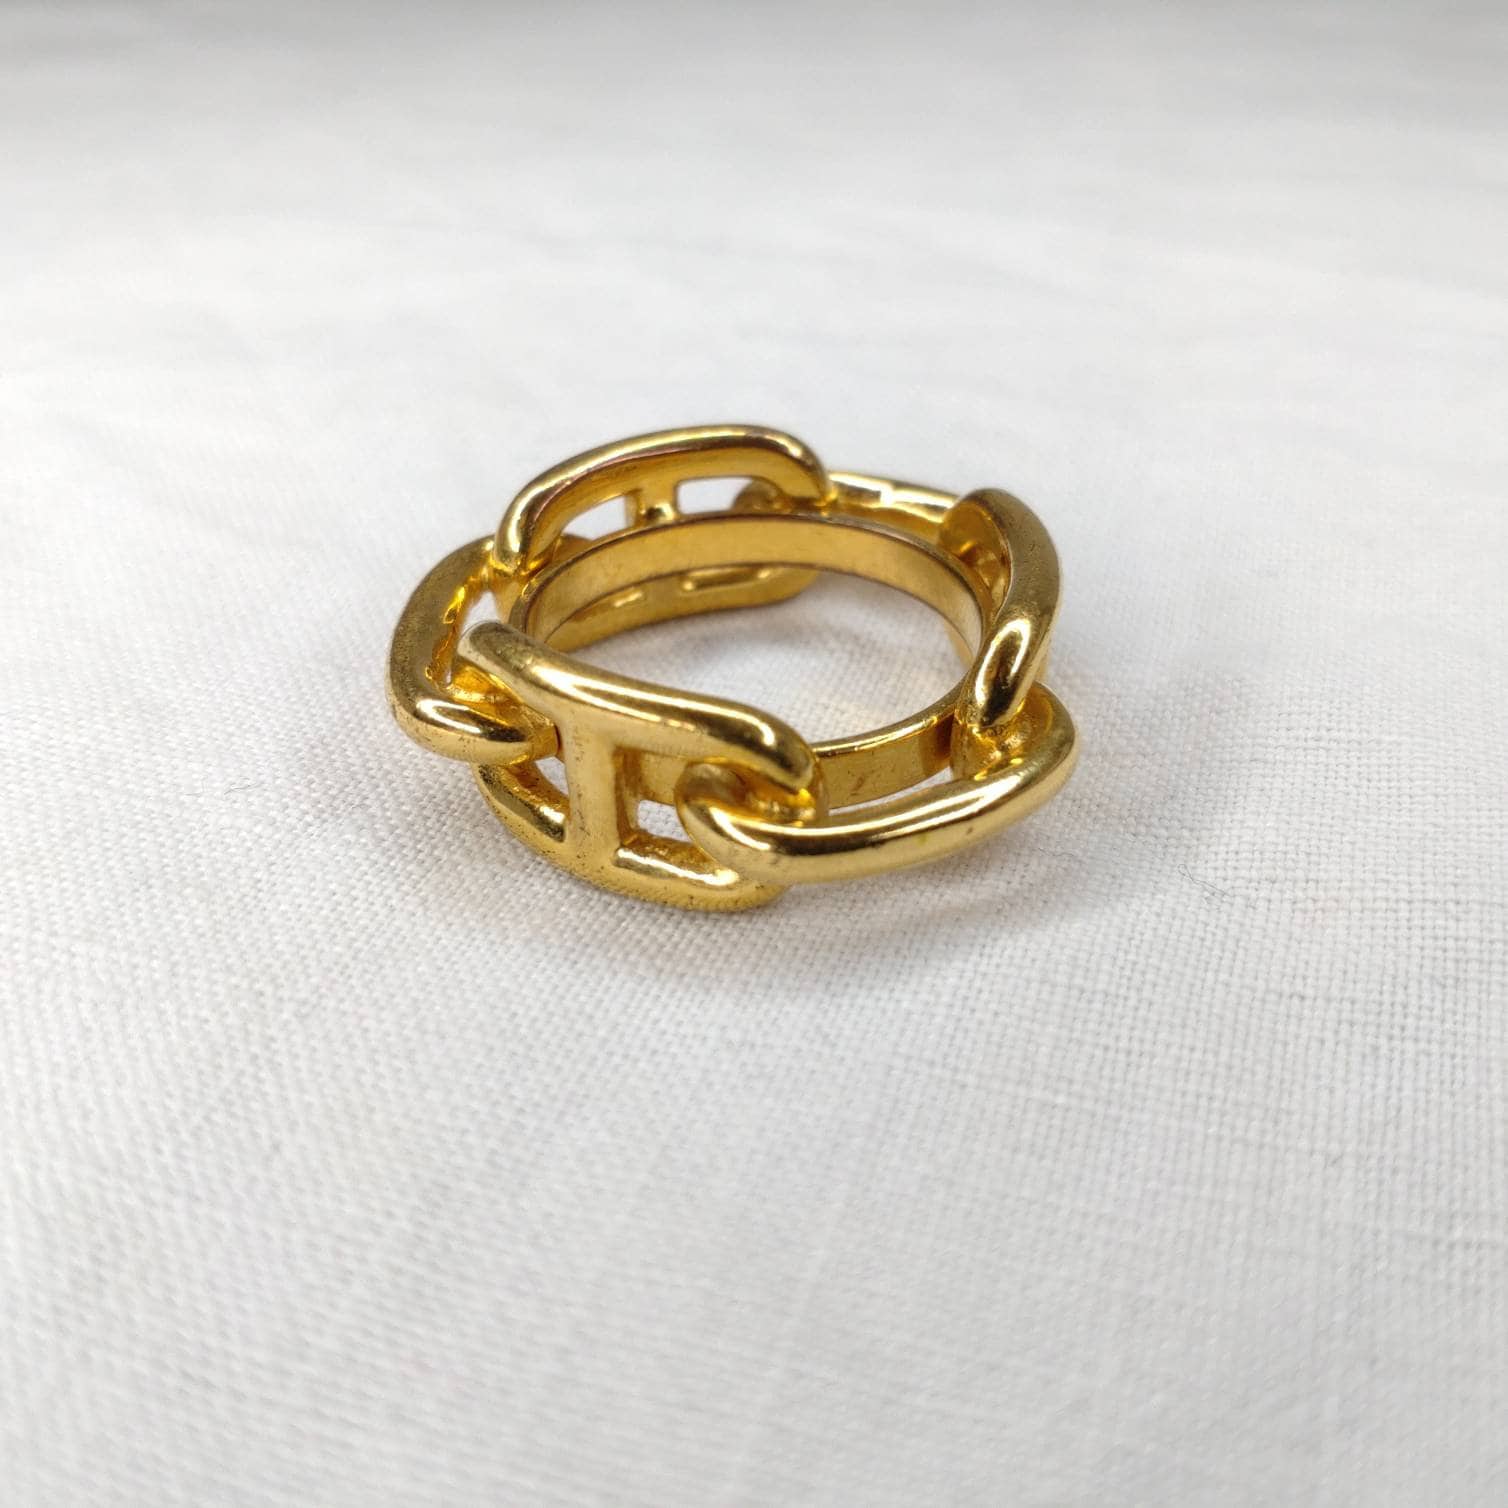 HERMES Scarf Ring 24 Carat Gold-plated Anchor Chain -  UK